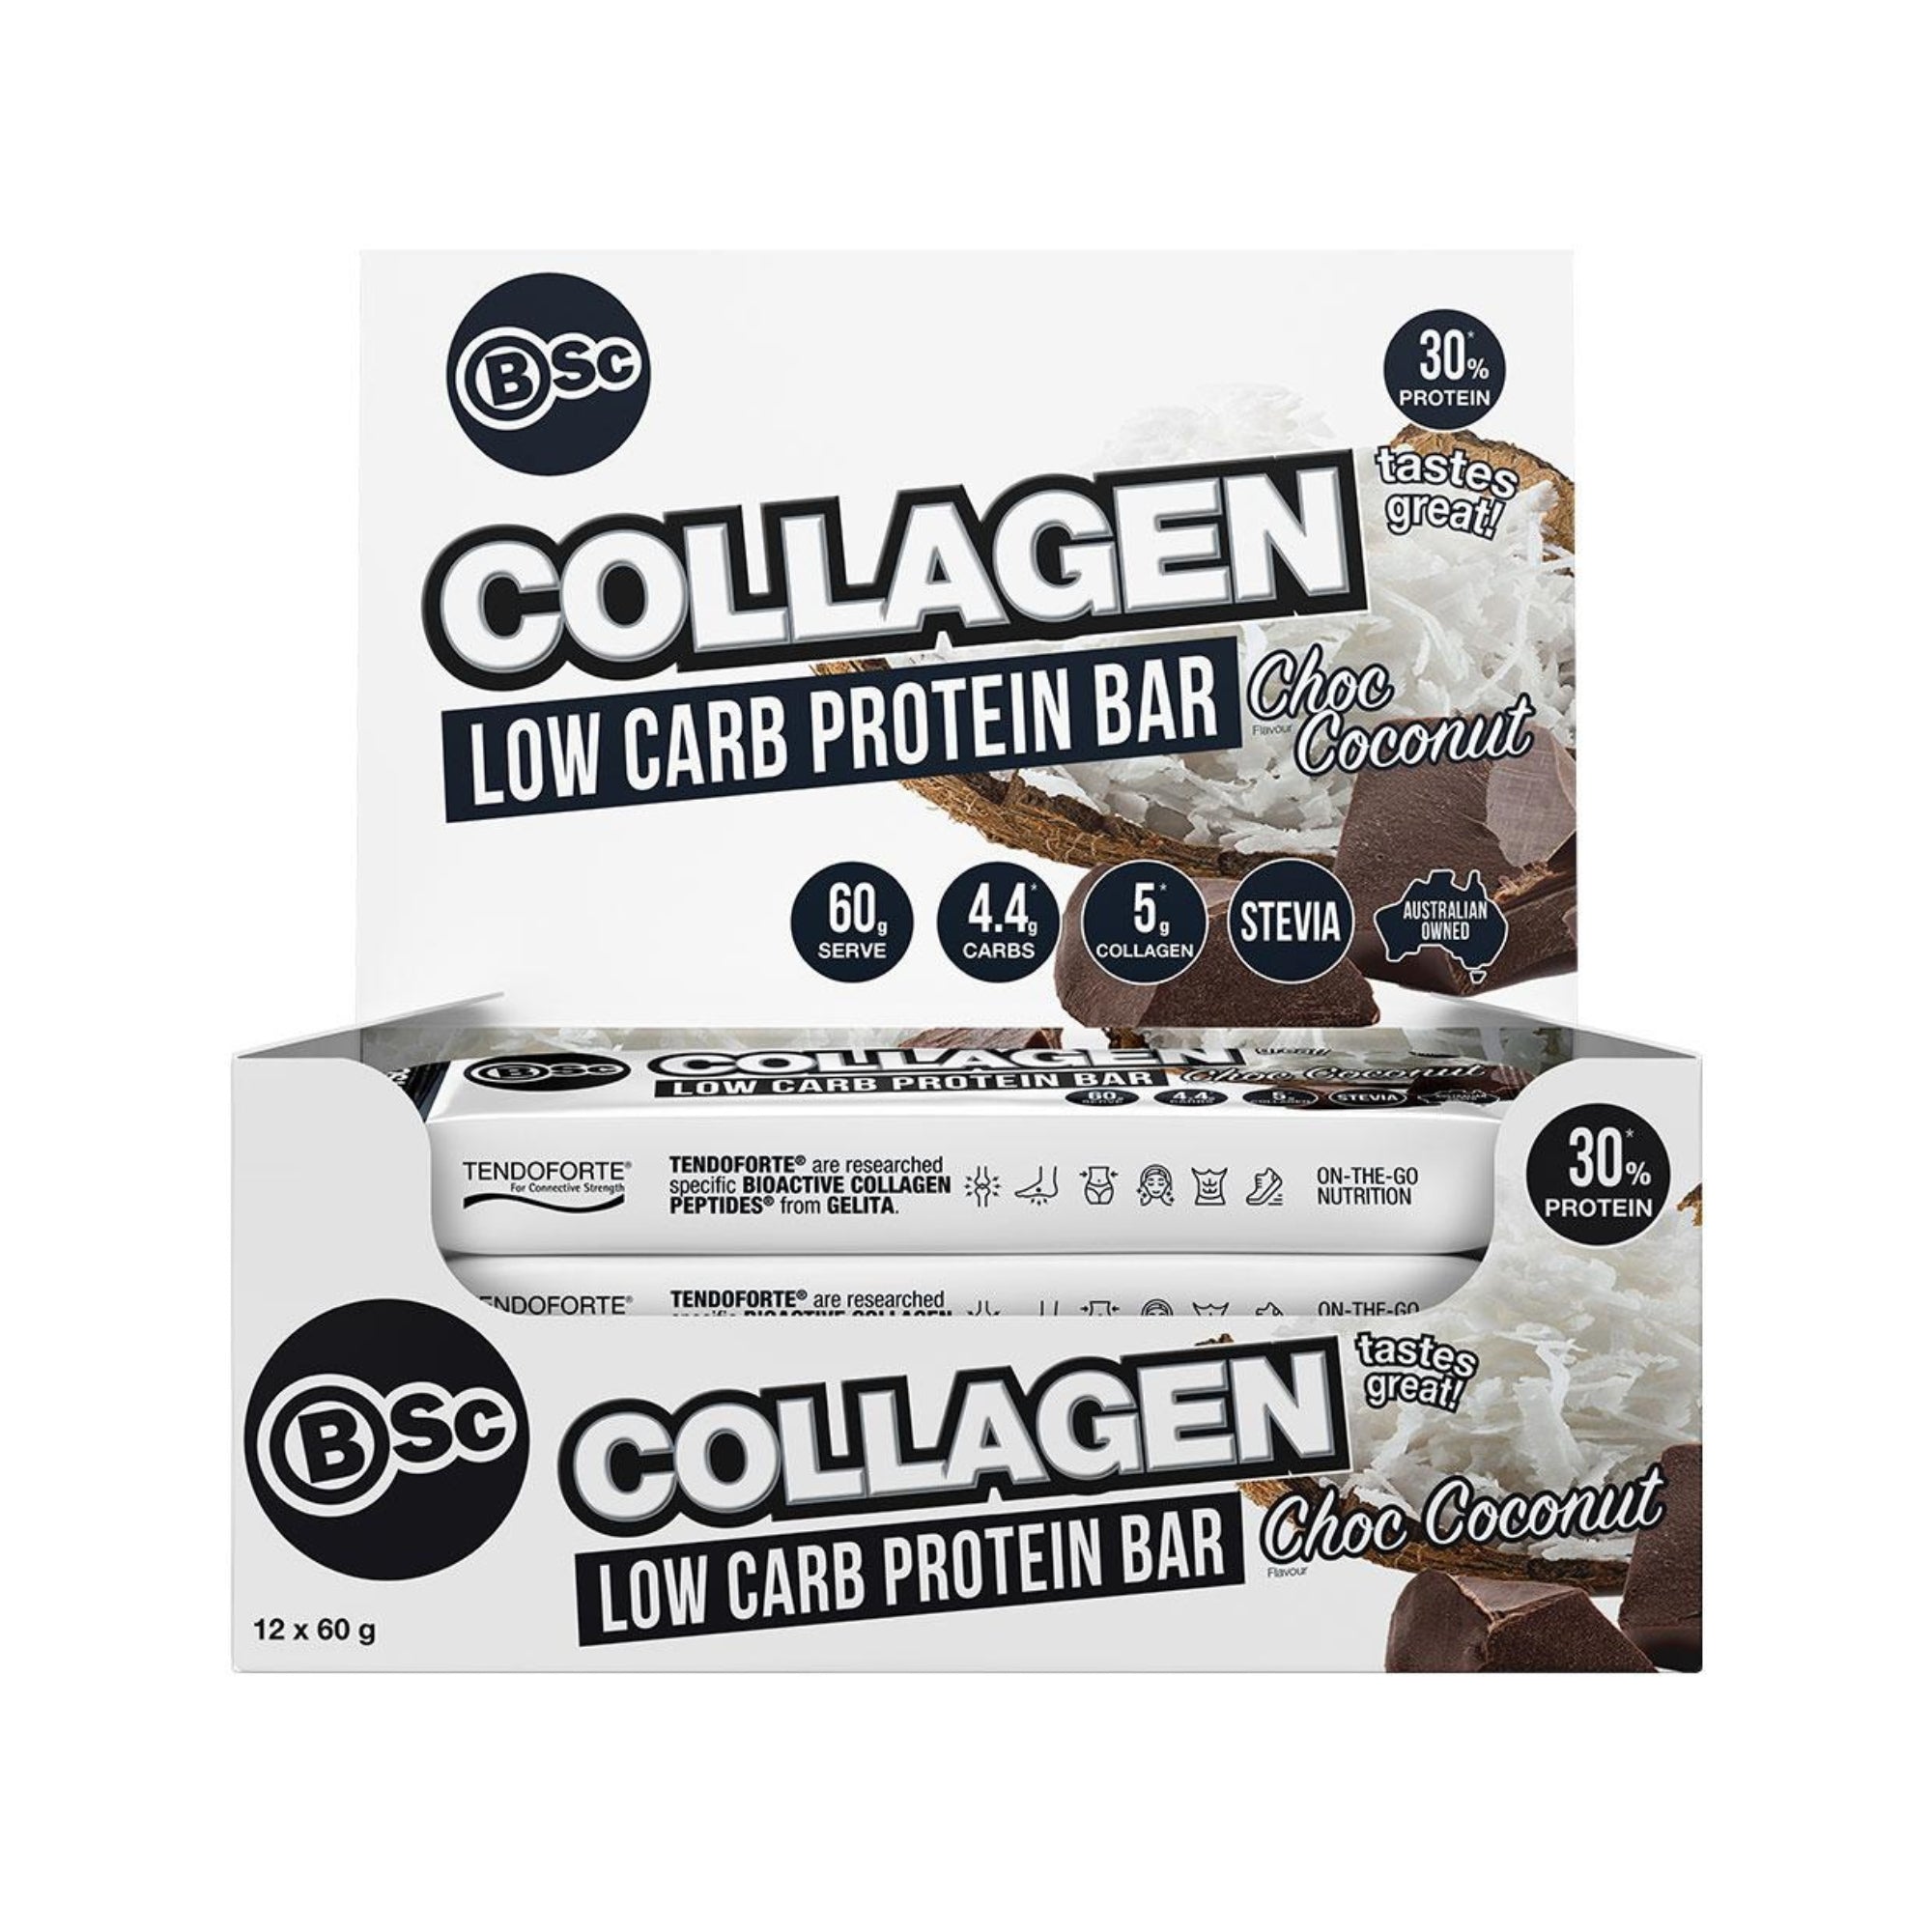 BSC Collagen Low Carb Protein Bar - Choc Coconut Box 12